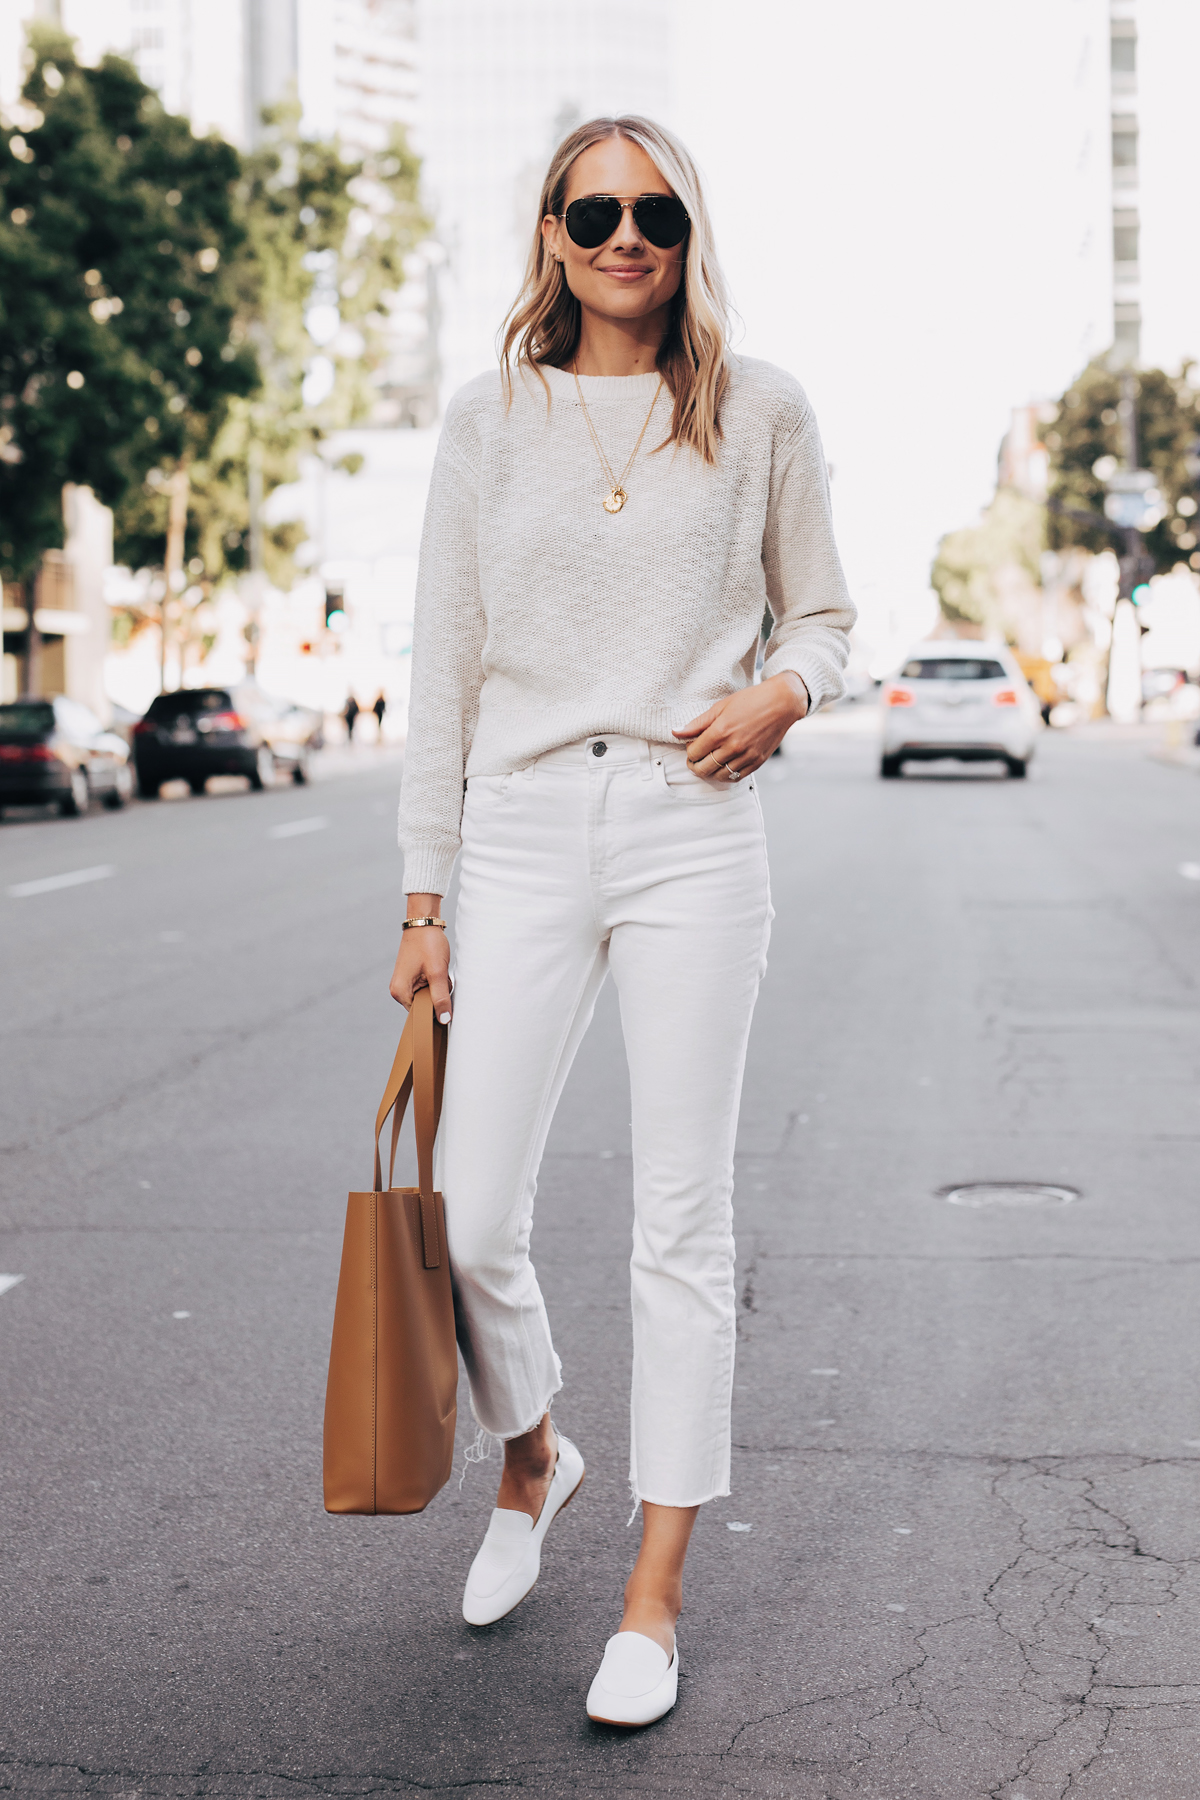 How To Style White Cropped Jeans